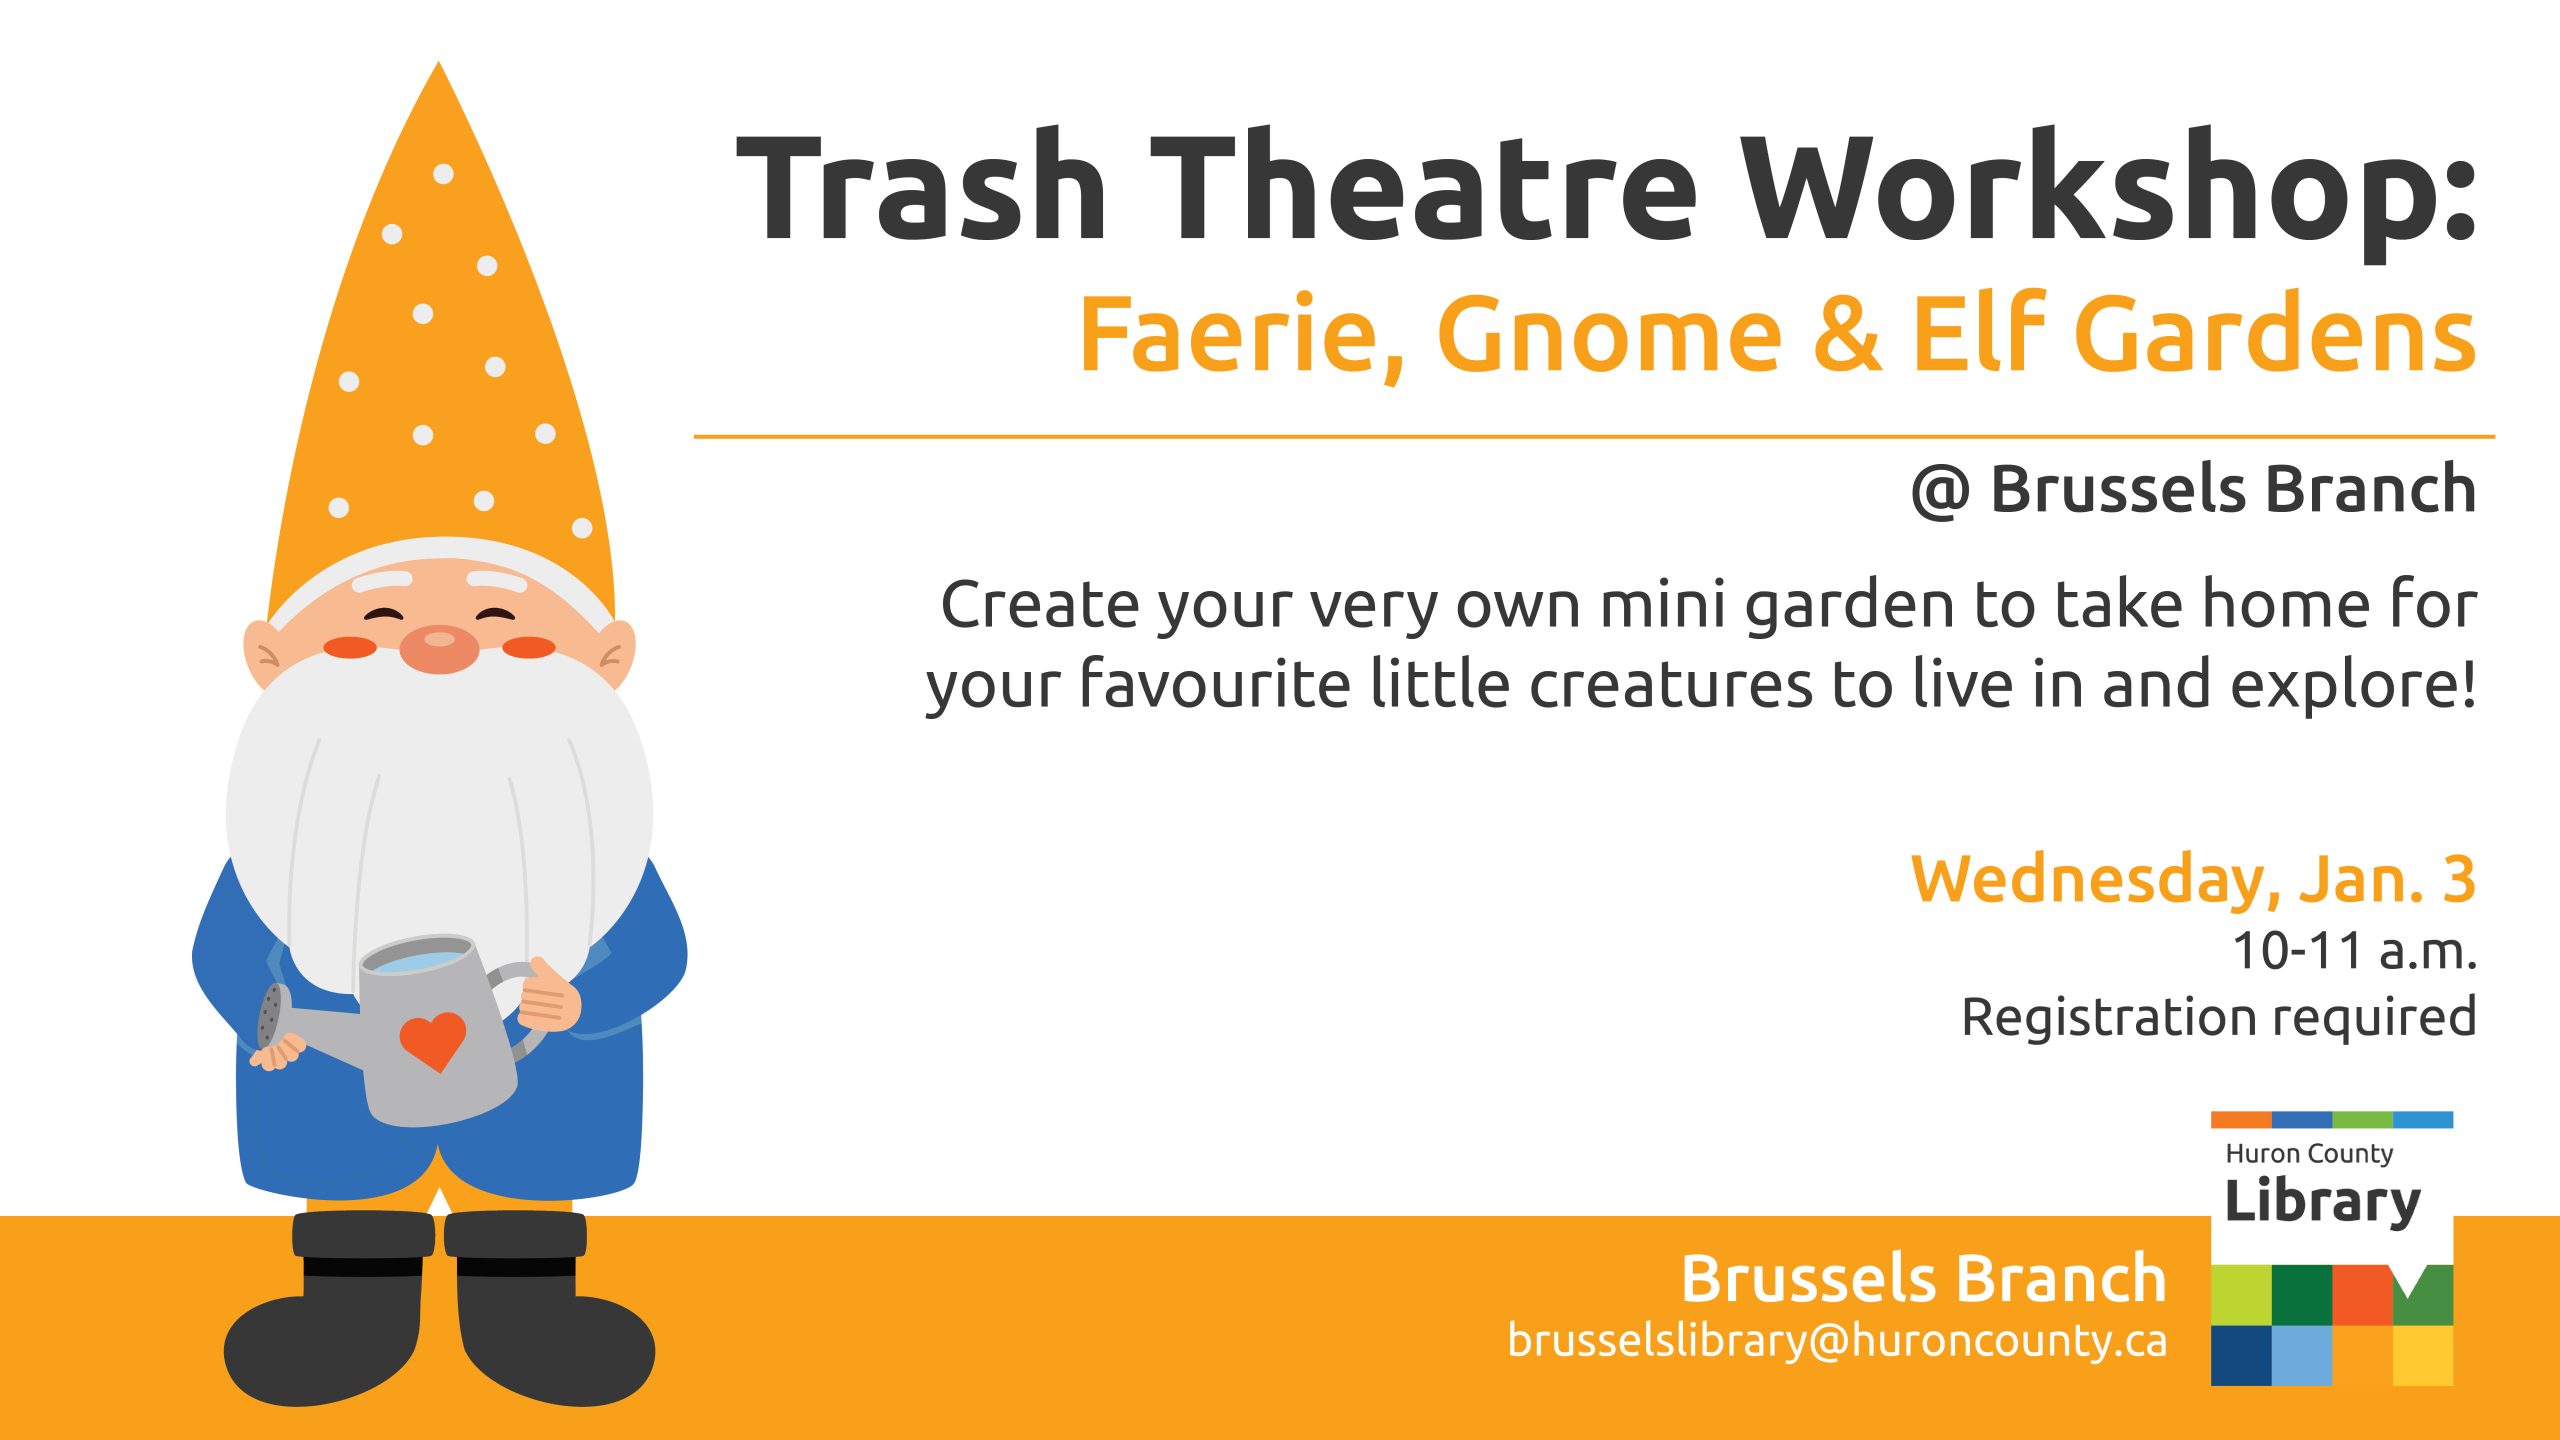 Illustration of a gnome with text promoting workshop at Brussels Branch